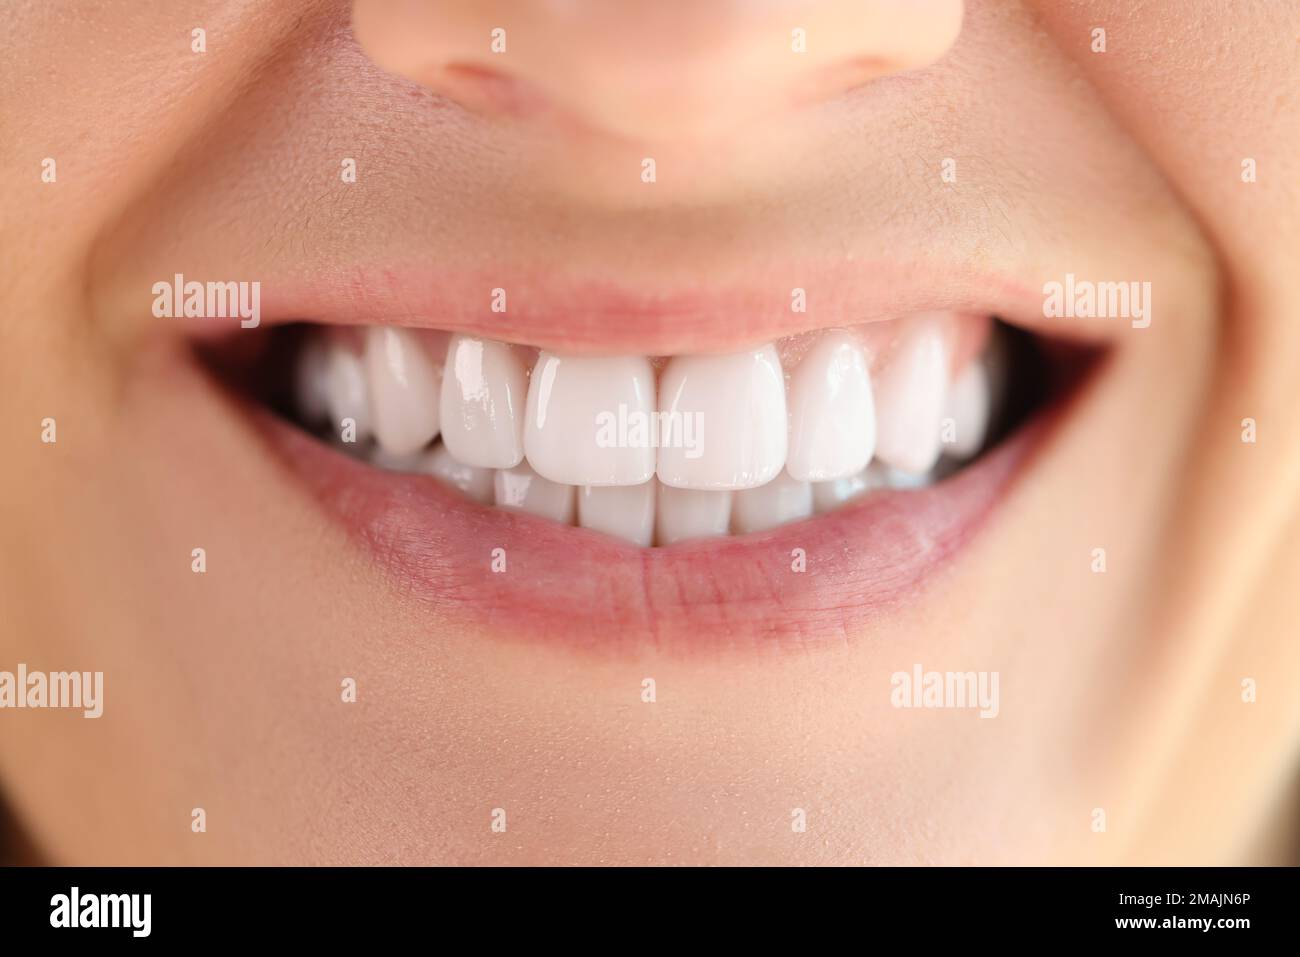 Close-up of healthy smooth white teeth smile. Stock Photo